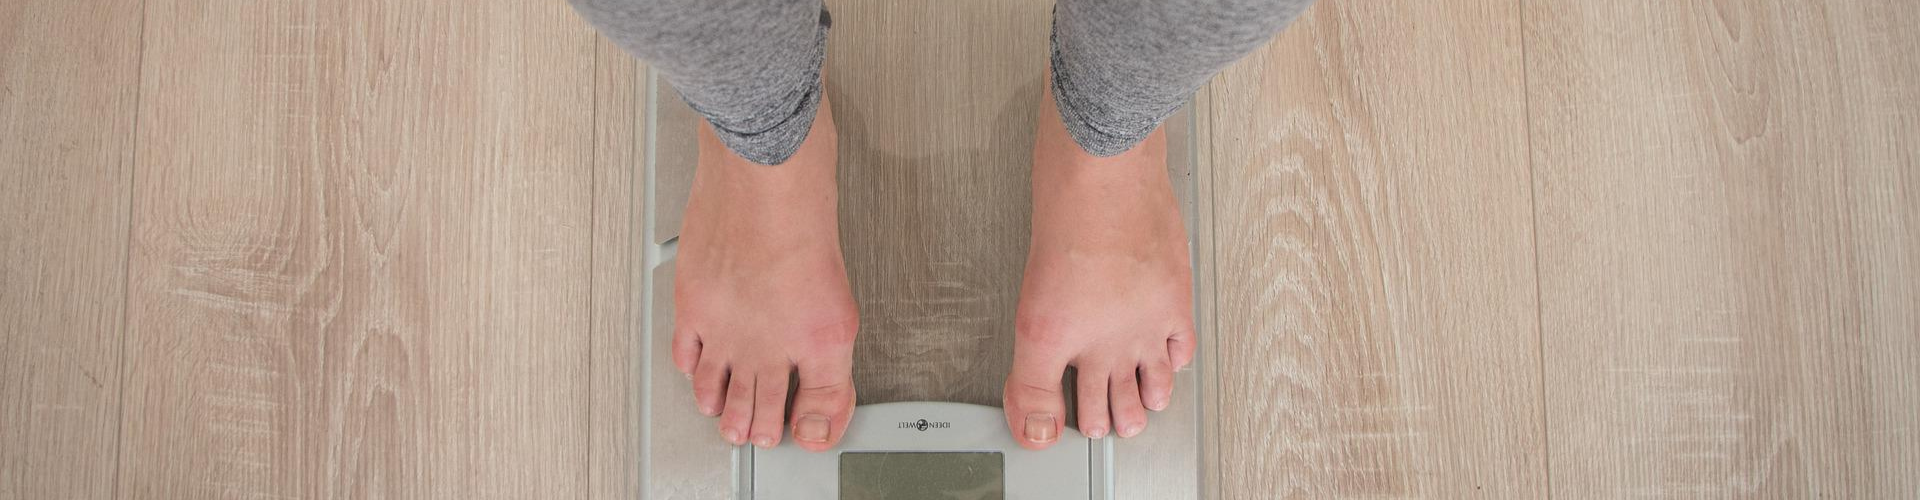 feet standing on a scale